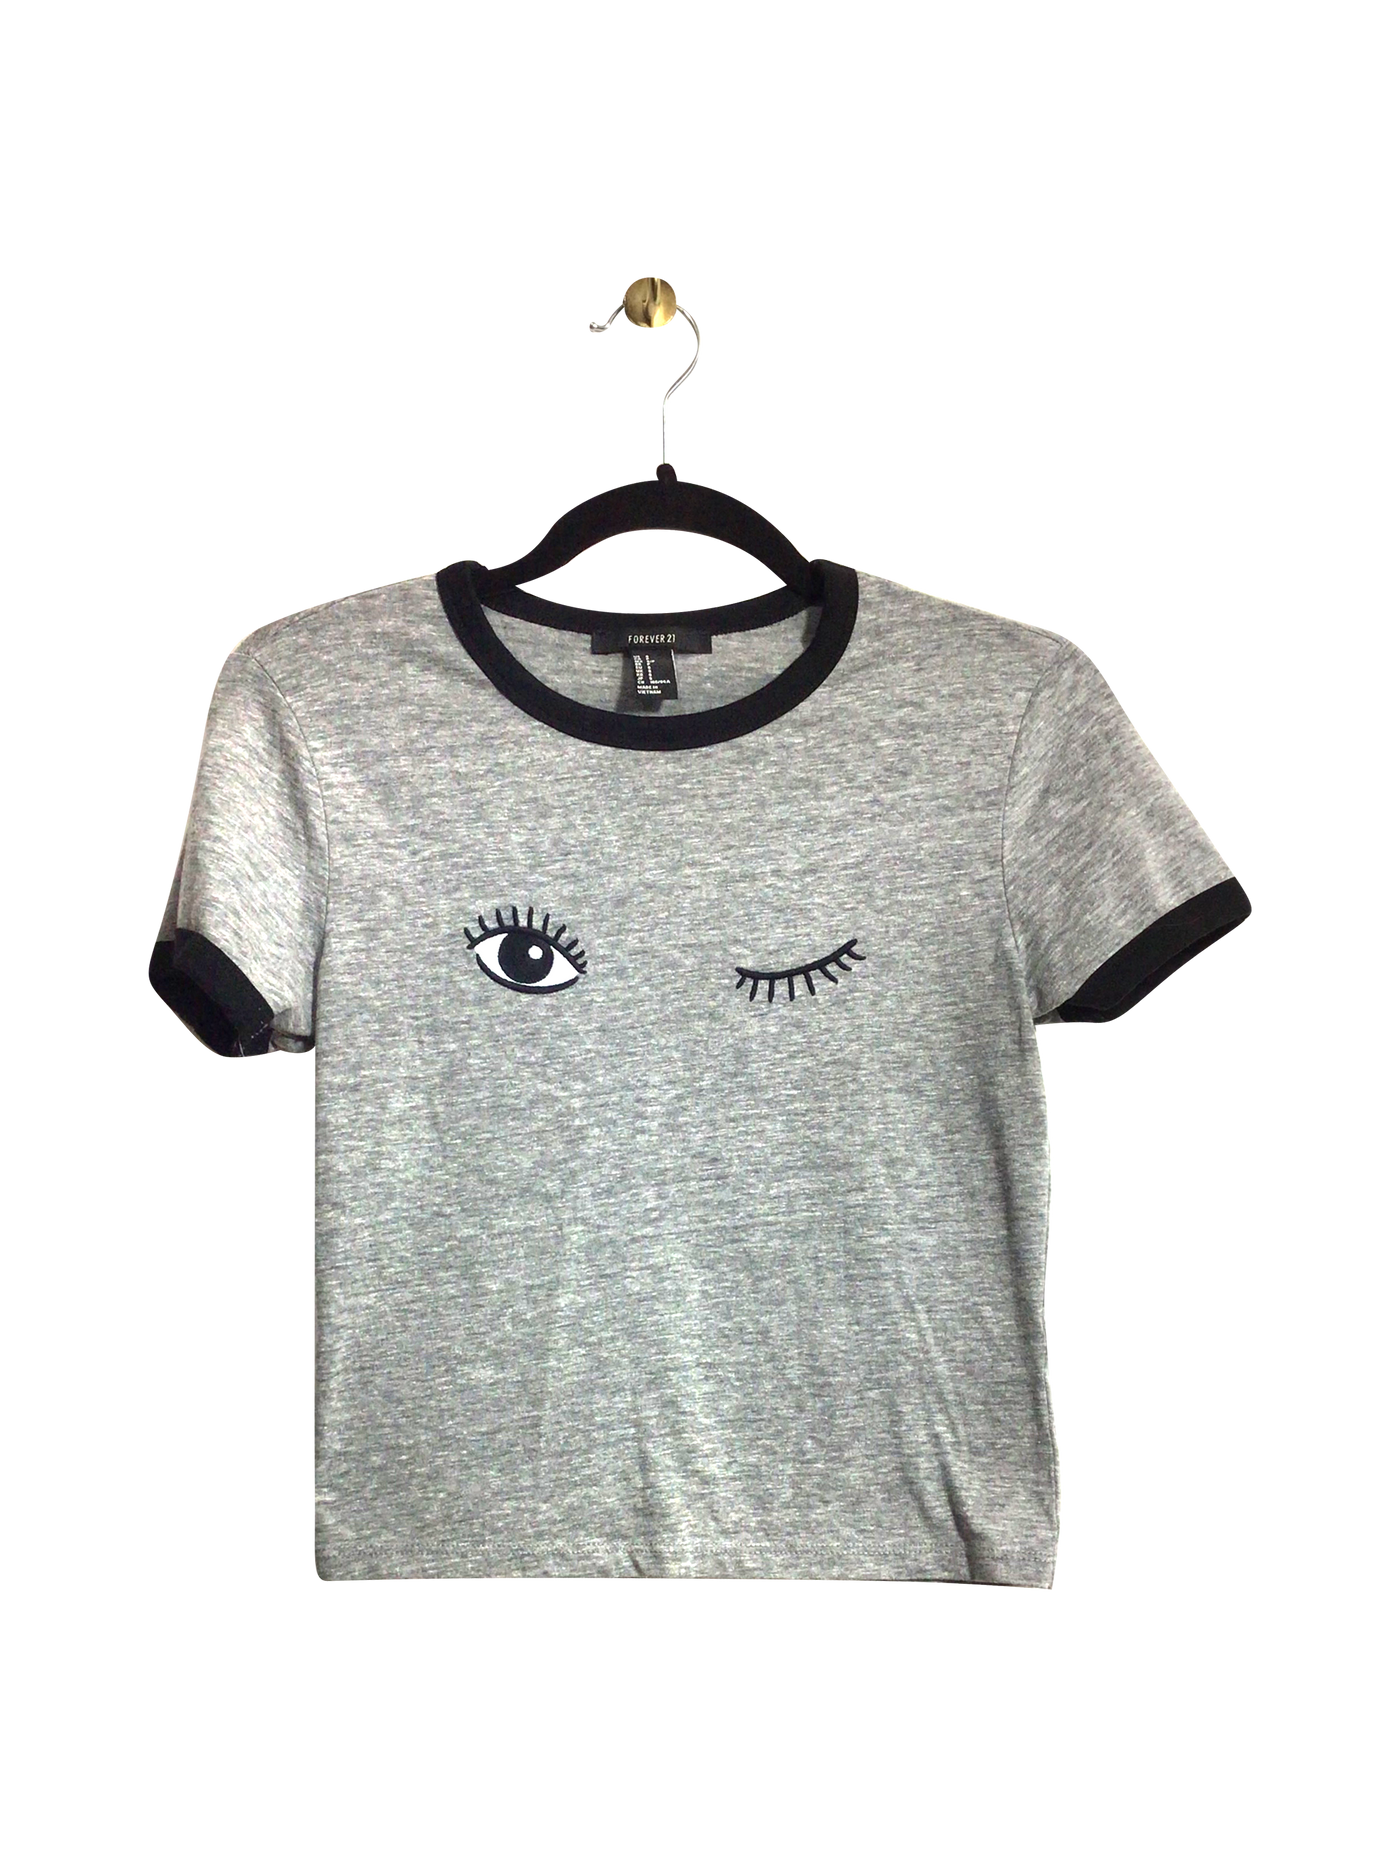 FOREVER 21 Women T-Shirts Regular fit in Gray - Size S | 11.29 $ KOOP